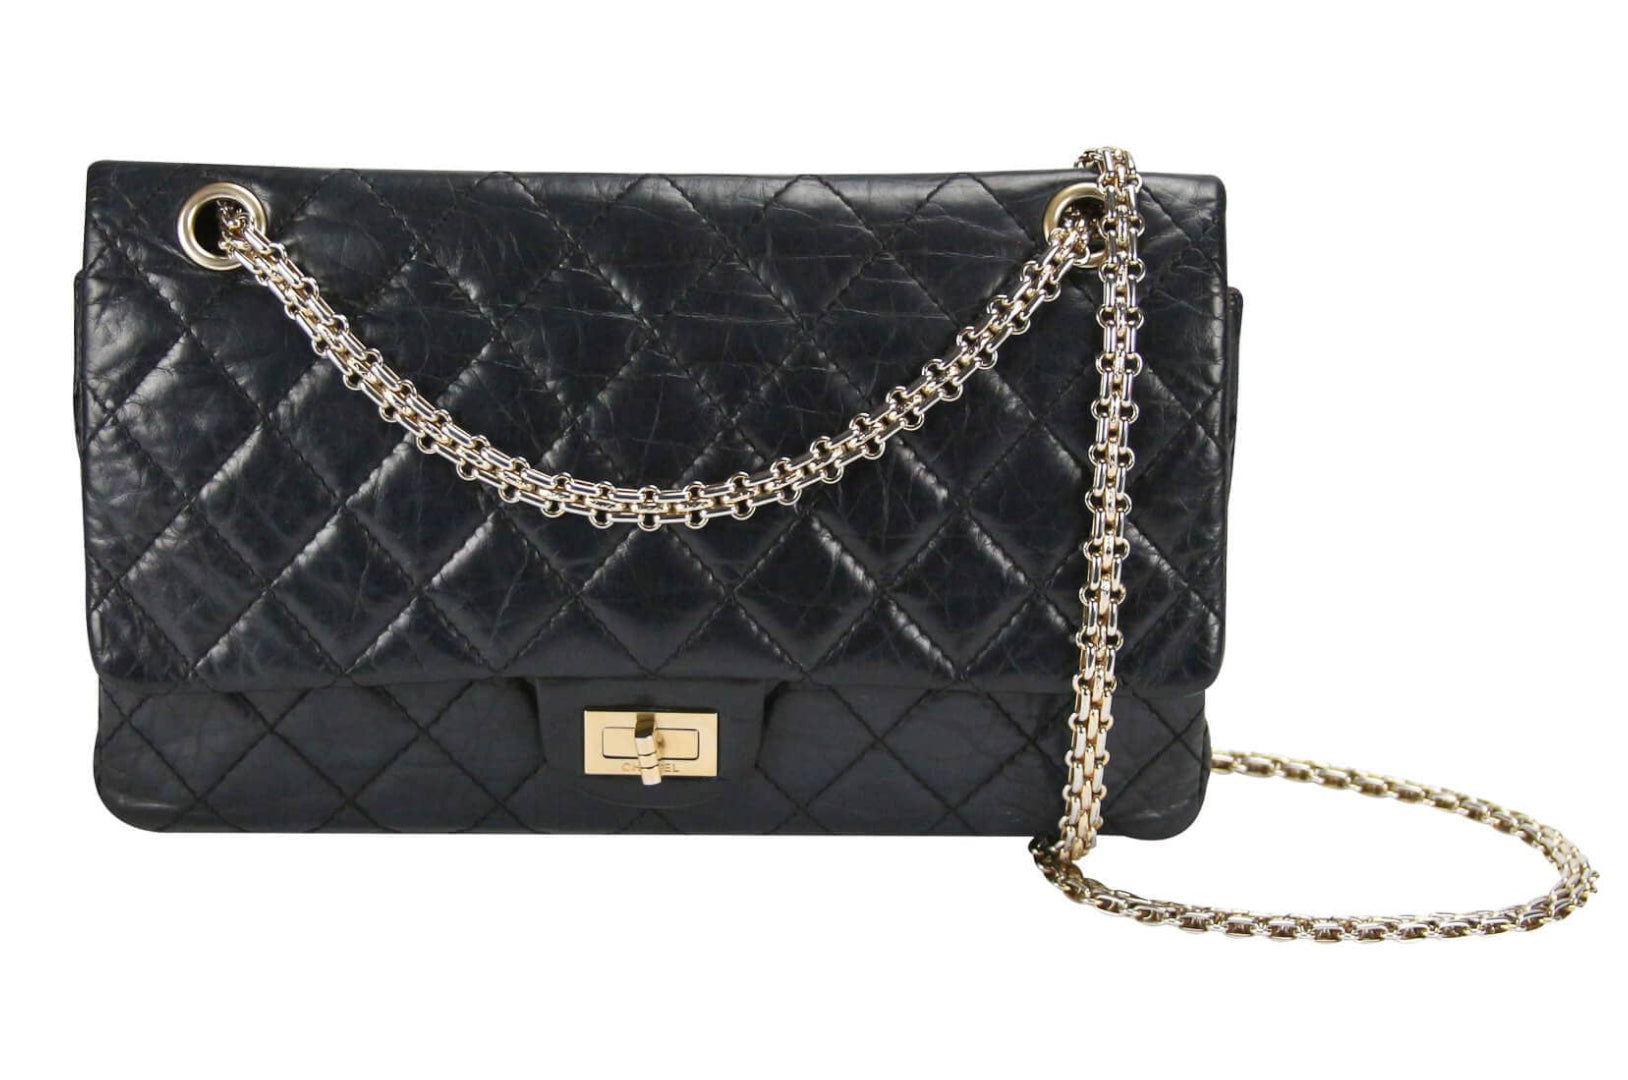 Black Caviar Petit Cerf Tote Gold Hardware, 2012, Handbags & Accessories, The Chanel Collection, 2022